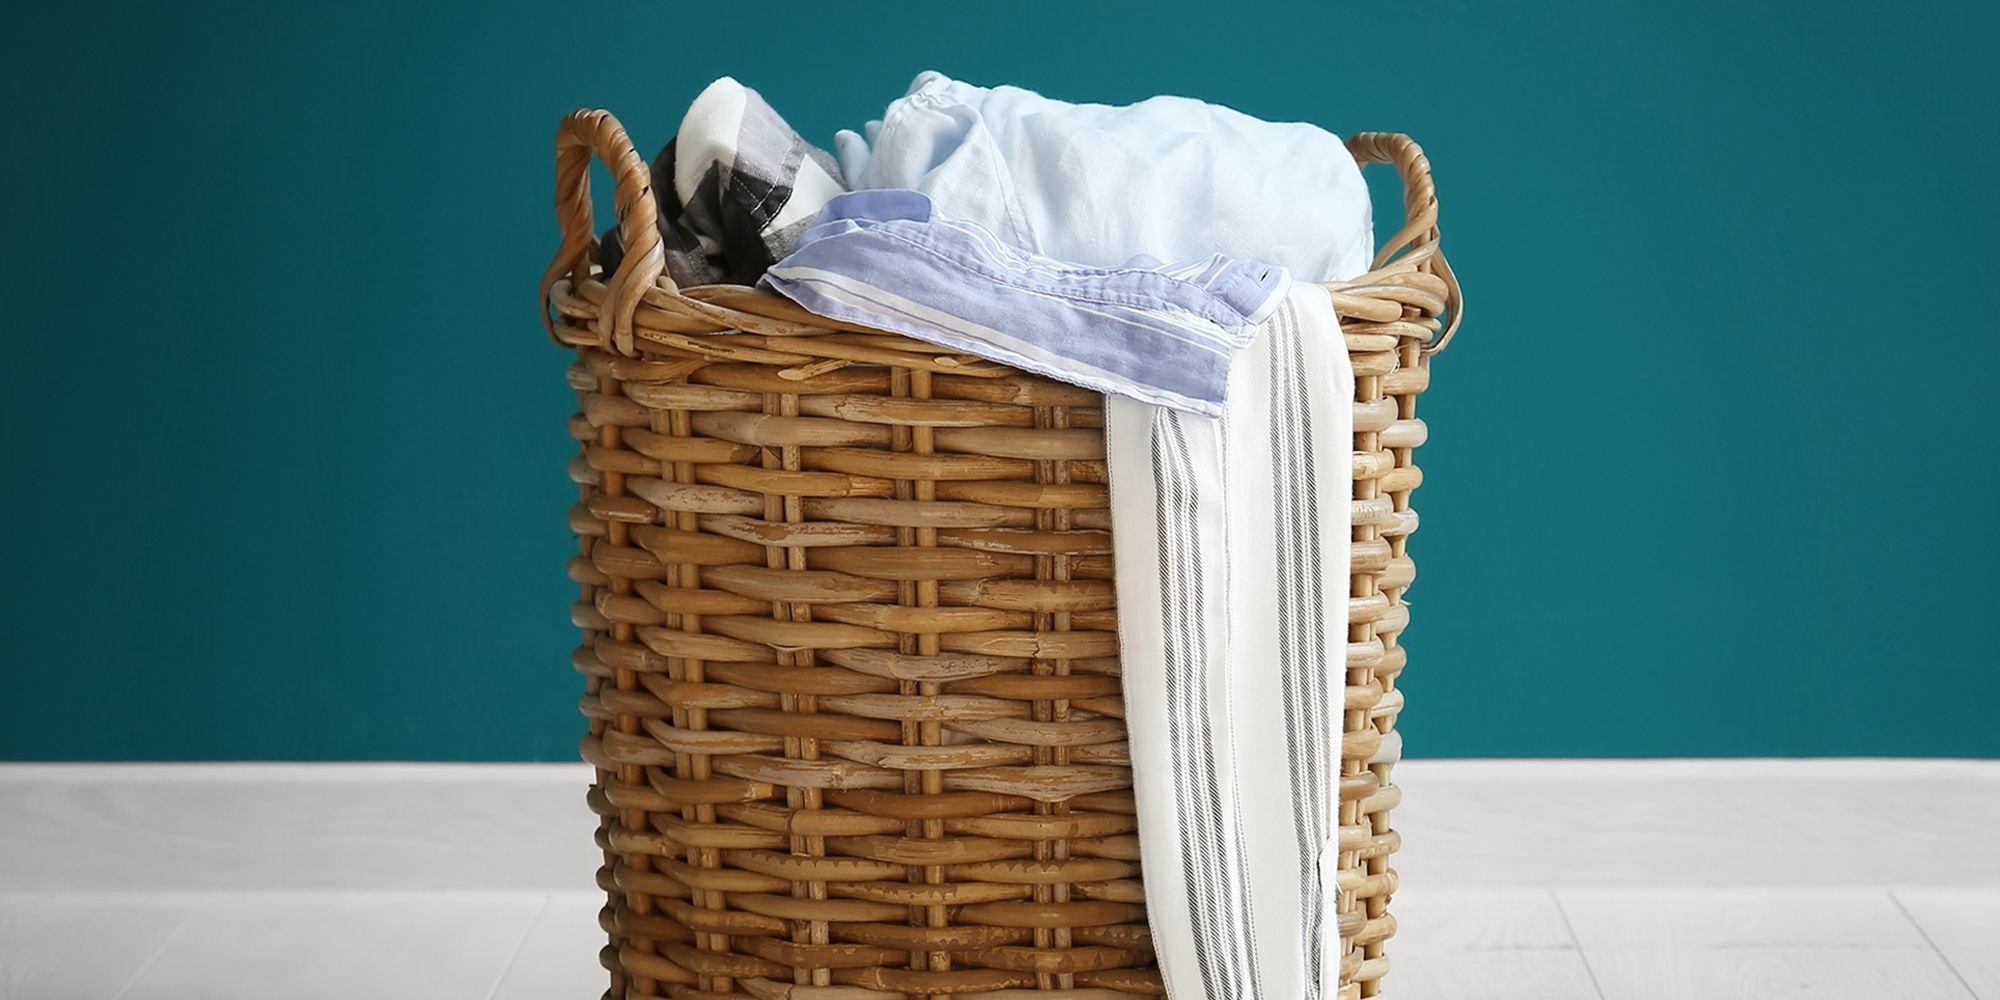 laundry baskets and hampers